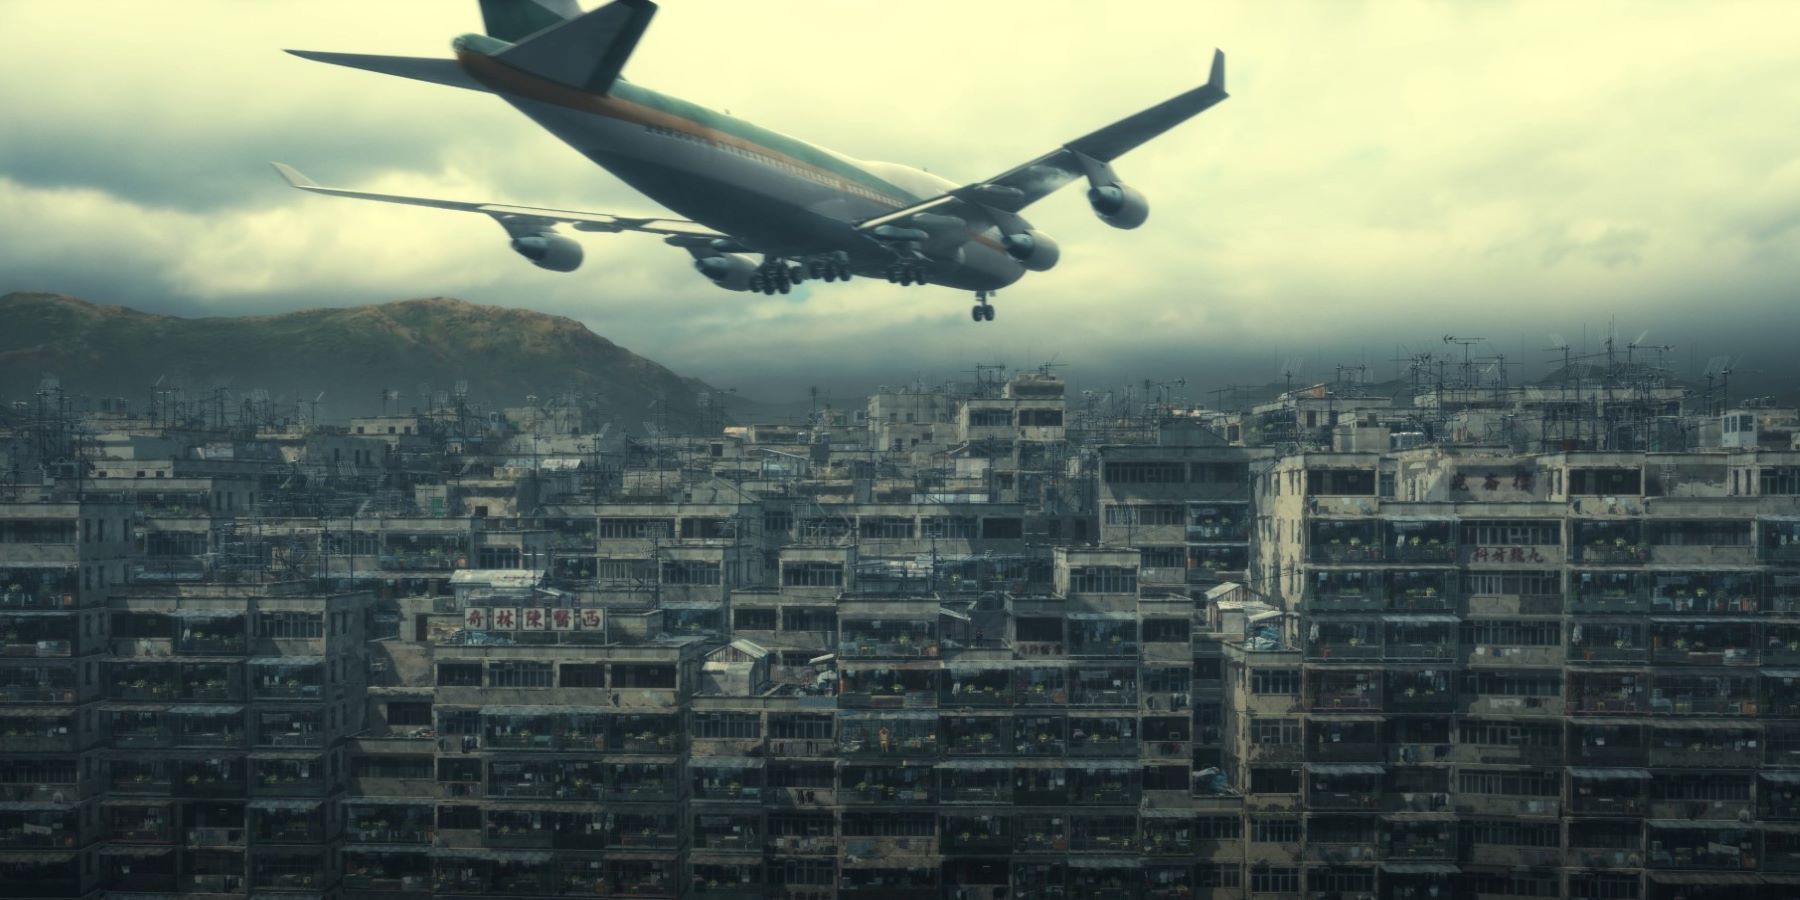 A plane flying just above the dense city where Bokeh Game Studio's Slitterhead takes place